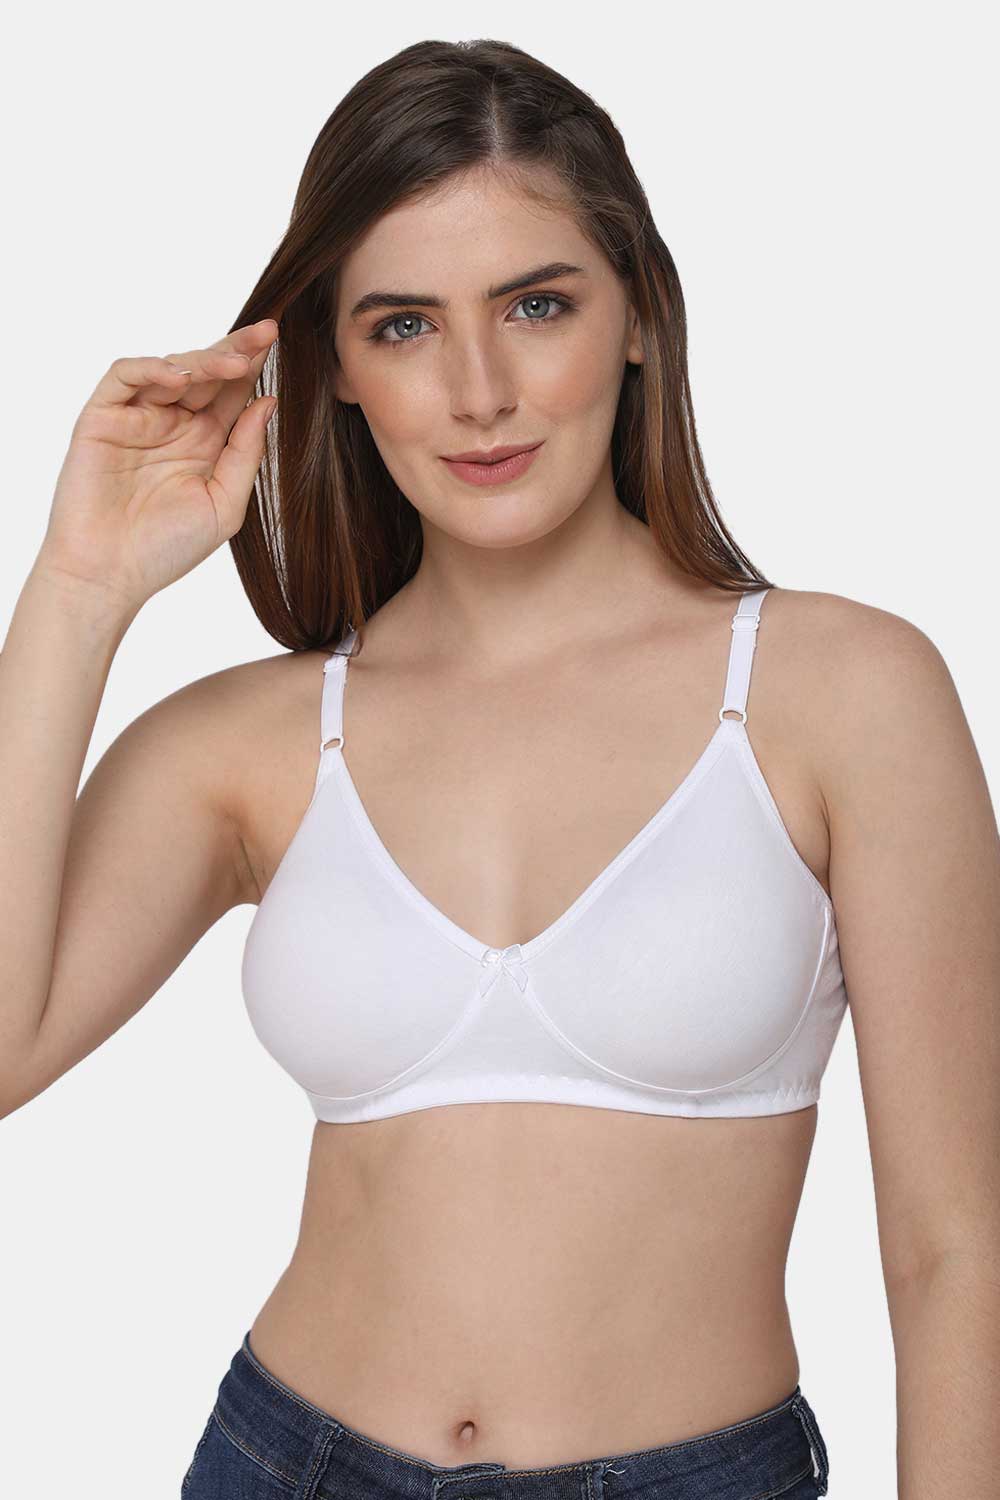 VNHNaiduhall Women Sports Non Padded Bra - Buy VNHNaiduhall Women Sports  Non Padded Bra Online at Best Prices in India